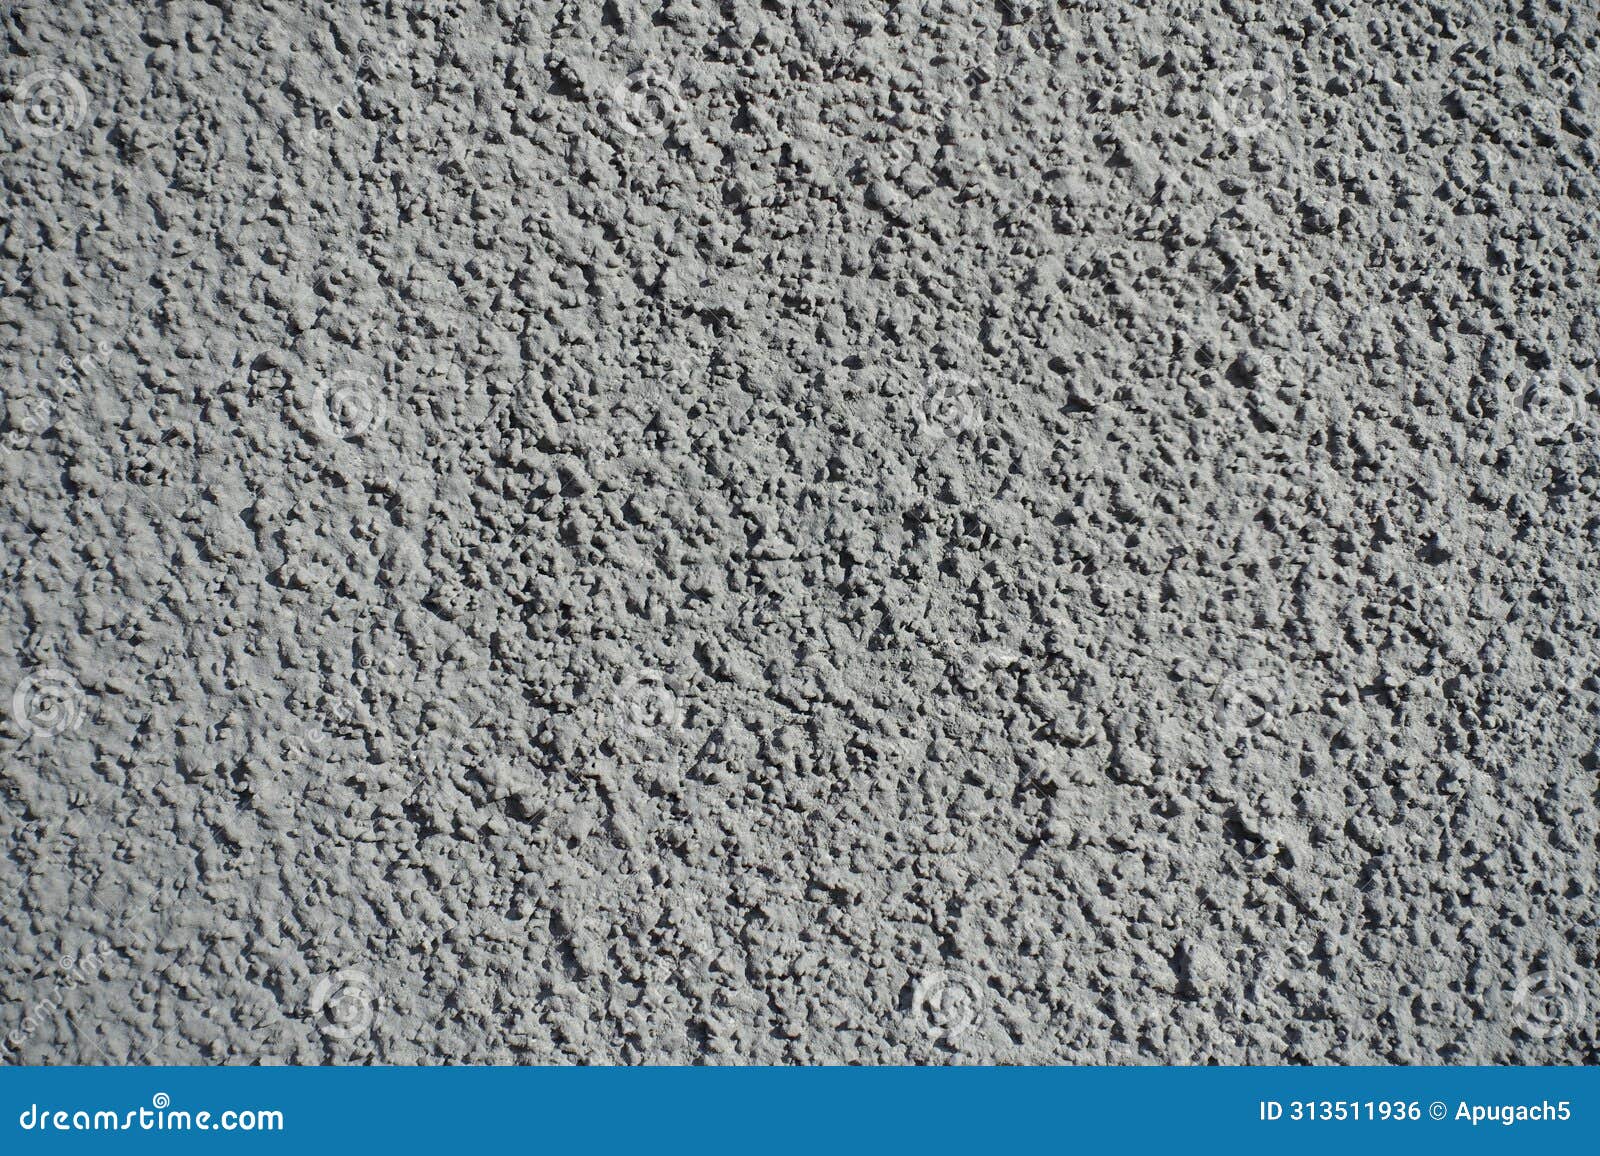 macro of wall with gray roughcast finish